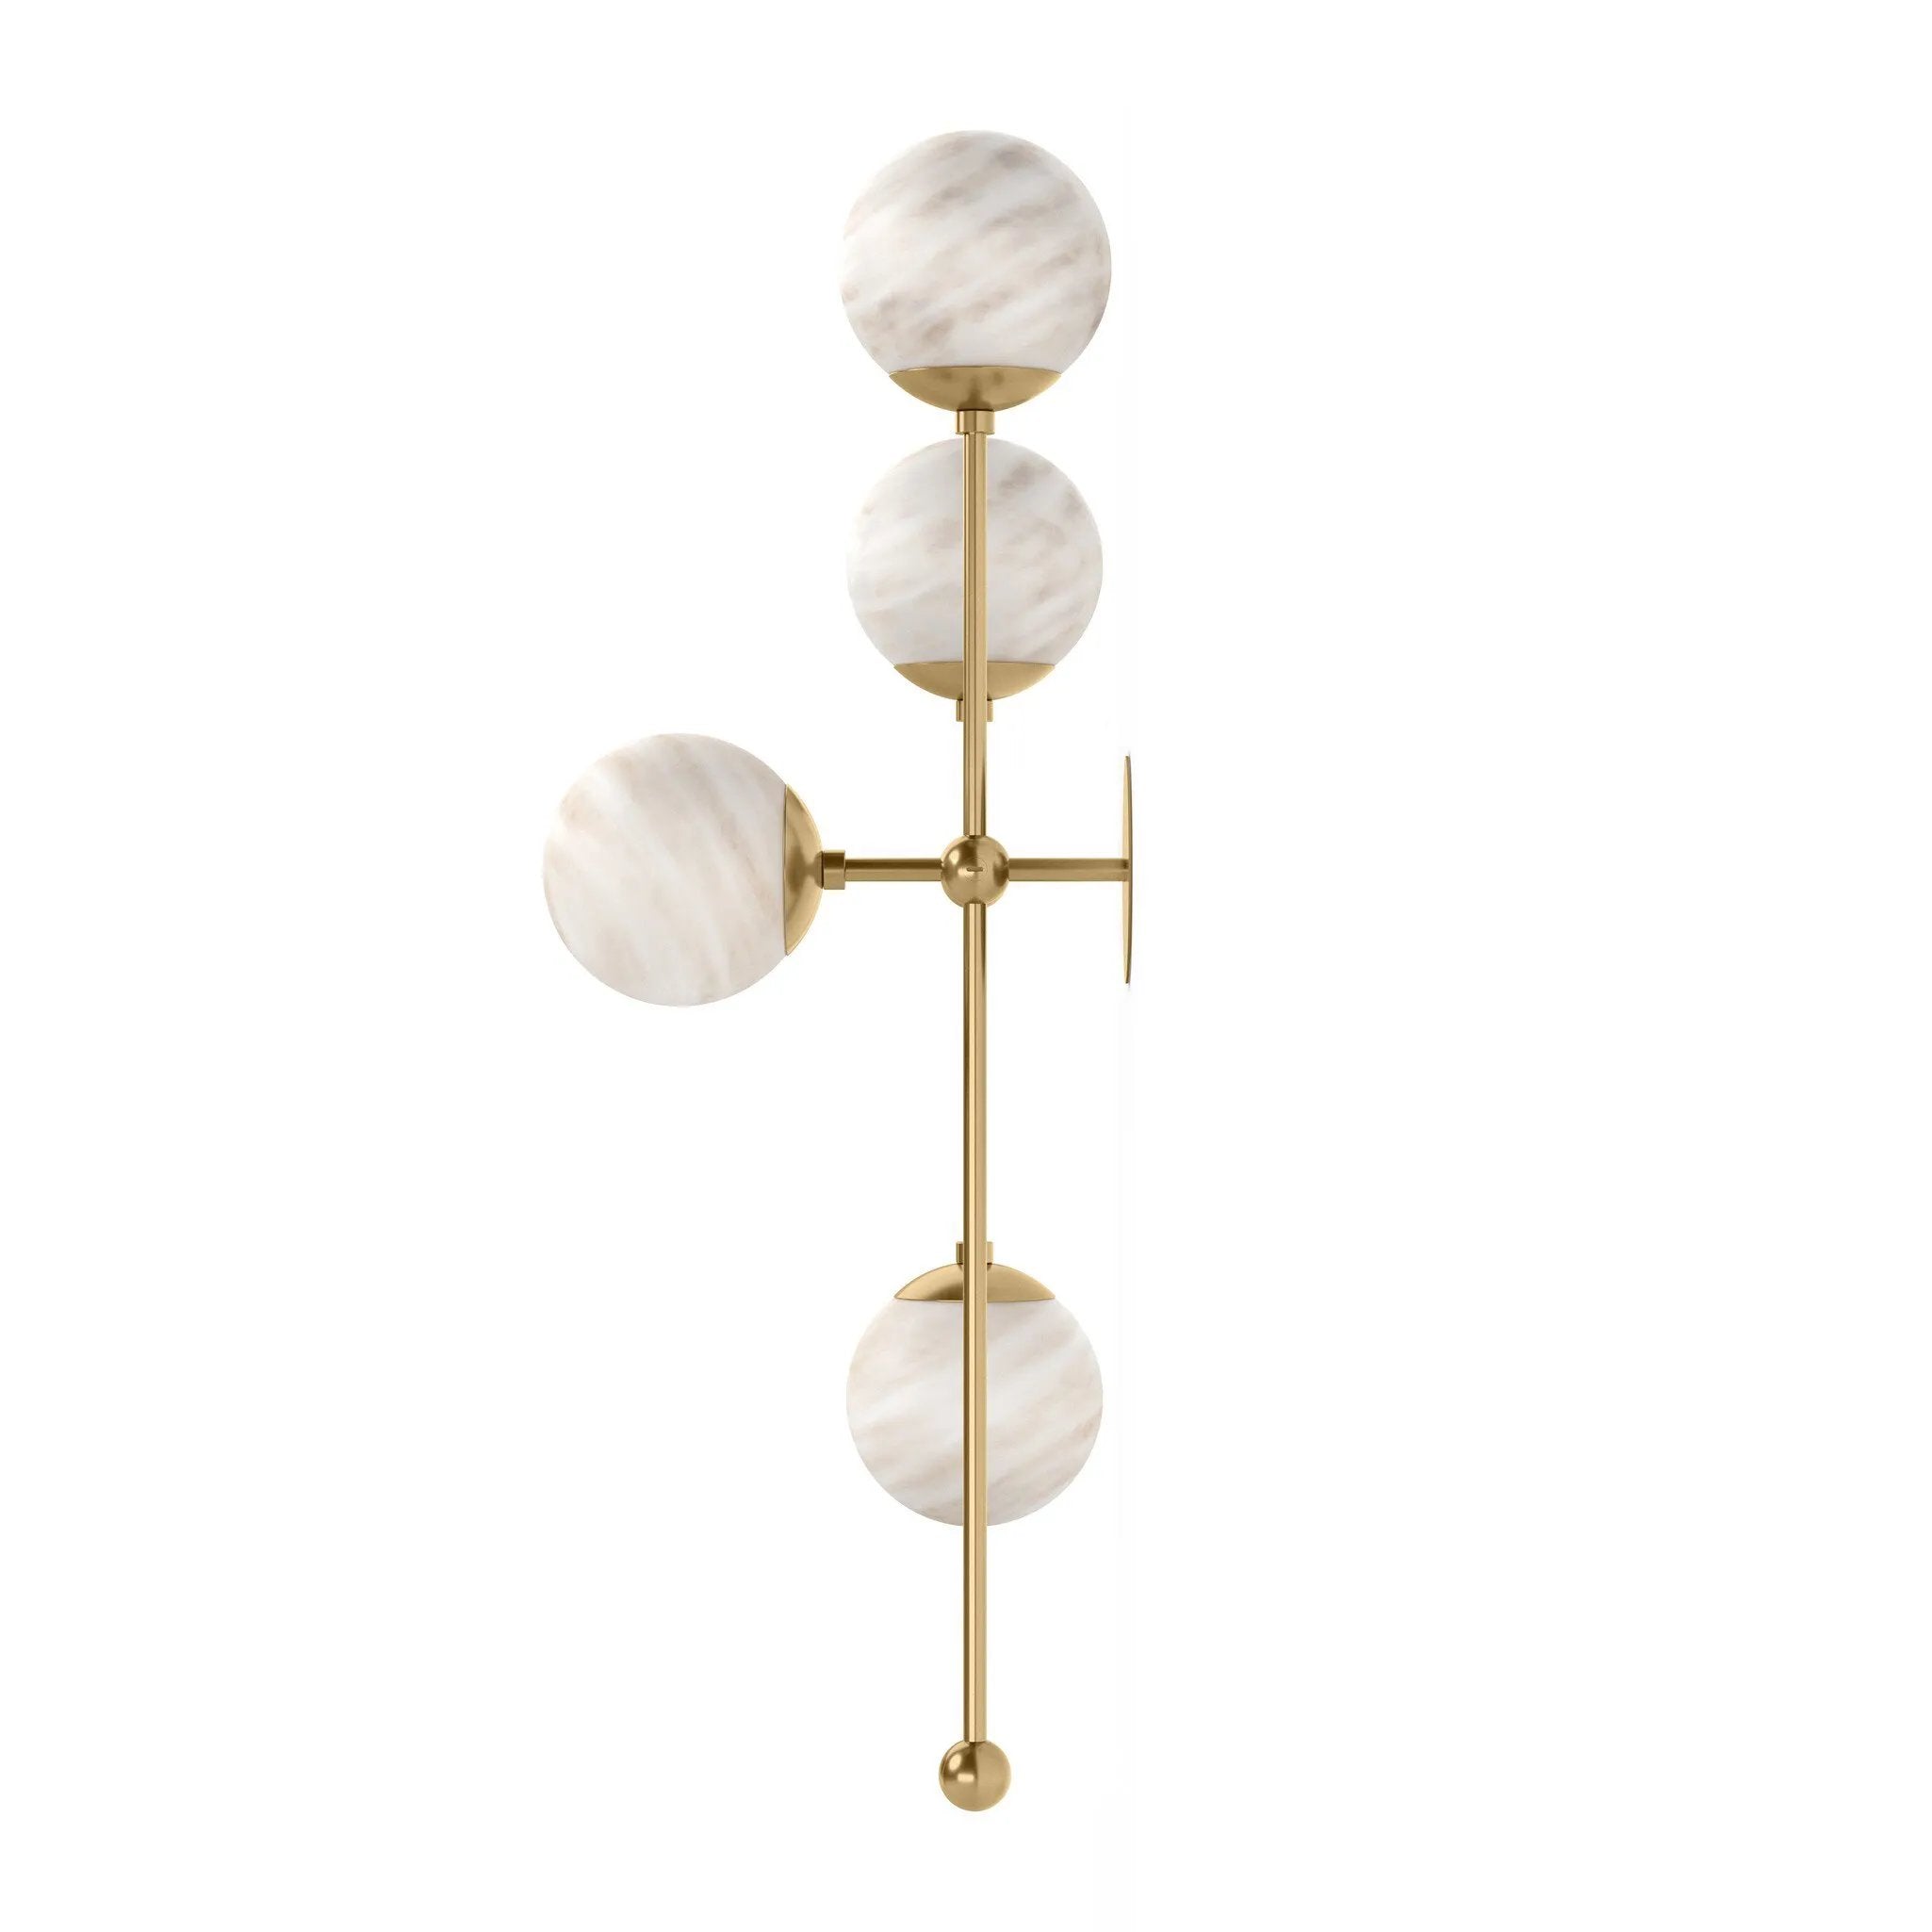 Marbled glass spheres seem to extend and reach across smooth brass rods. Each globe is individually blown, shaped and sculpted by hand through a one-hour process. Brass and glass are 98% recyclable. Designed and sustainably made in Poland by Schwung.Overall Dimensions13.75"w x 13.00"d x 36.25"hFull Details &amp; SpecificationsTear Shee Amethyst Home provides interior design, new home construction design consulting, vintage area rugs, and lighting in the Park City metro area.